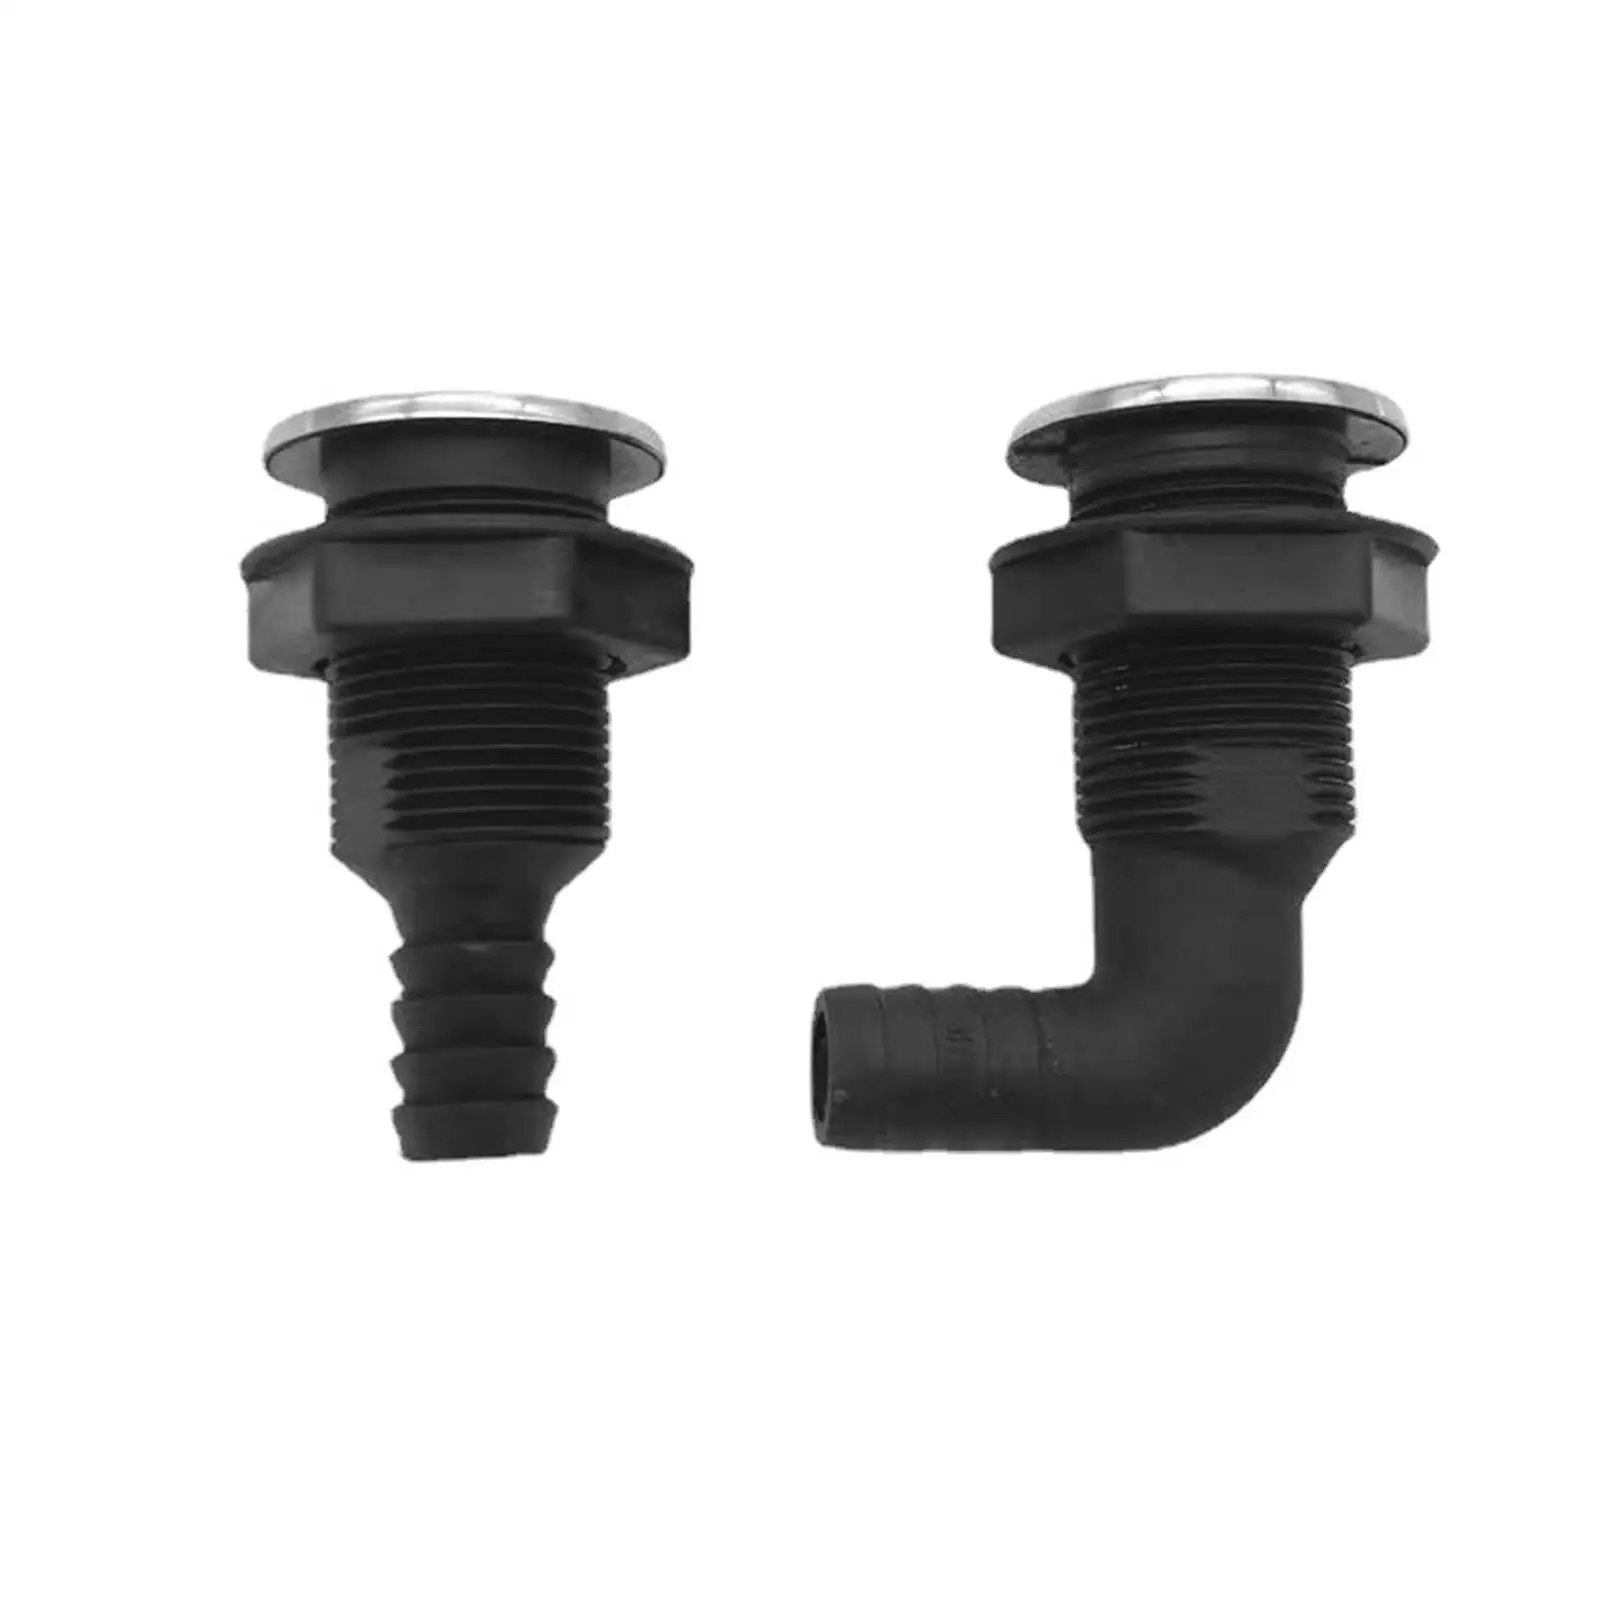 

thru Hull Fitting Universal Easily Install Hardware Hull Hose Connector